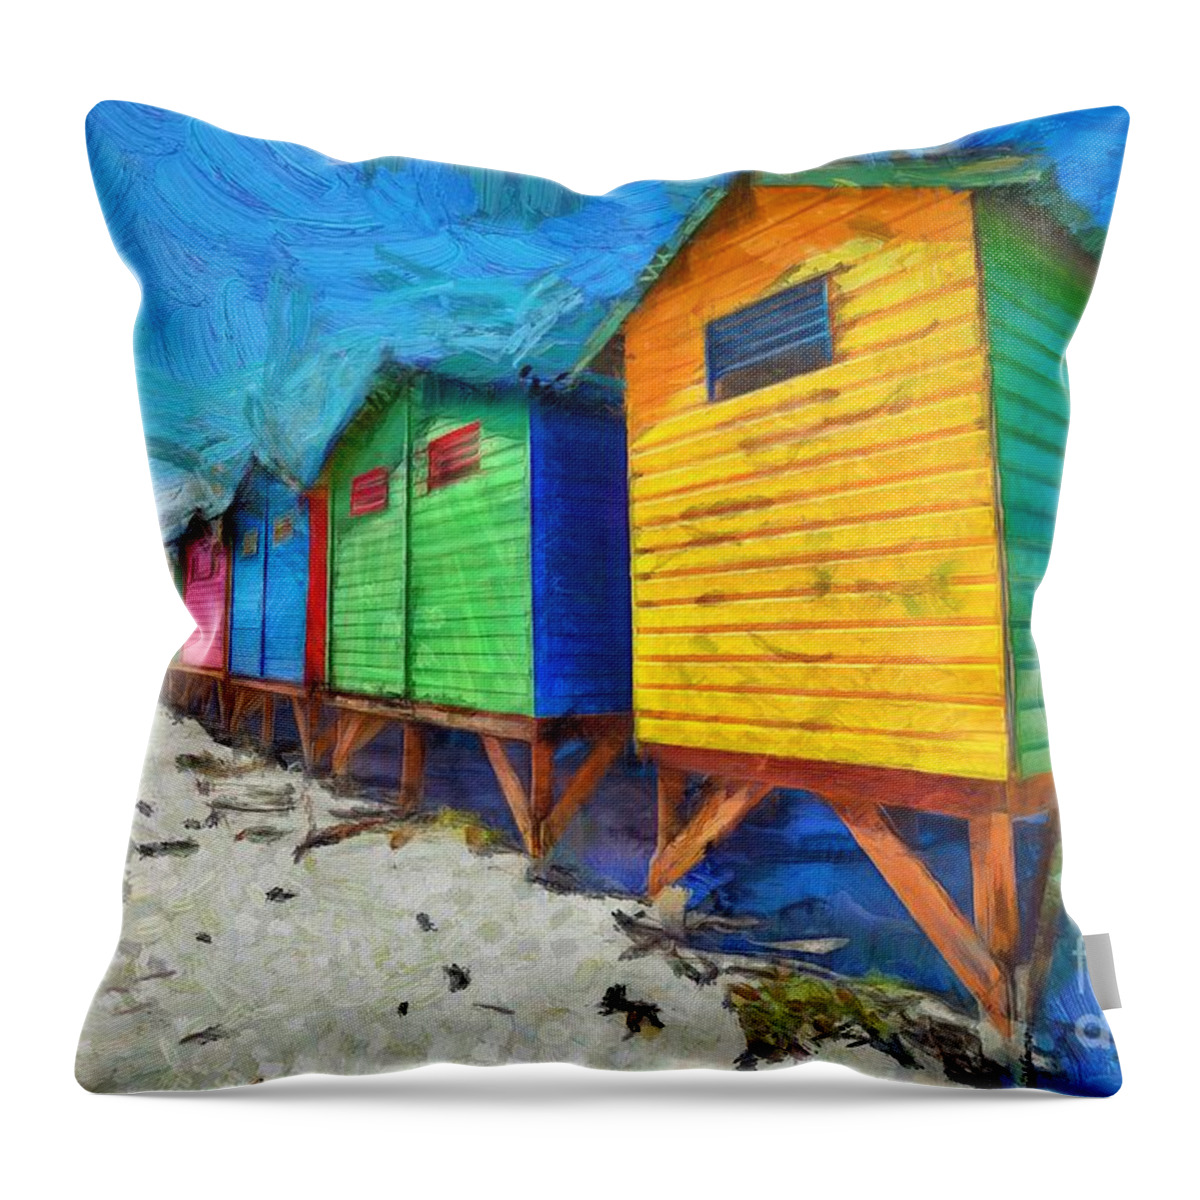 Muizenberg Throw Pillow featuring the digital art Colorful Beach Huts by Eva Lechner